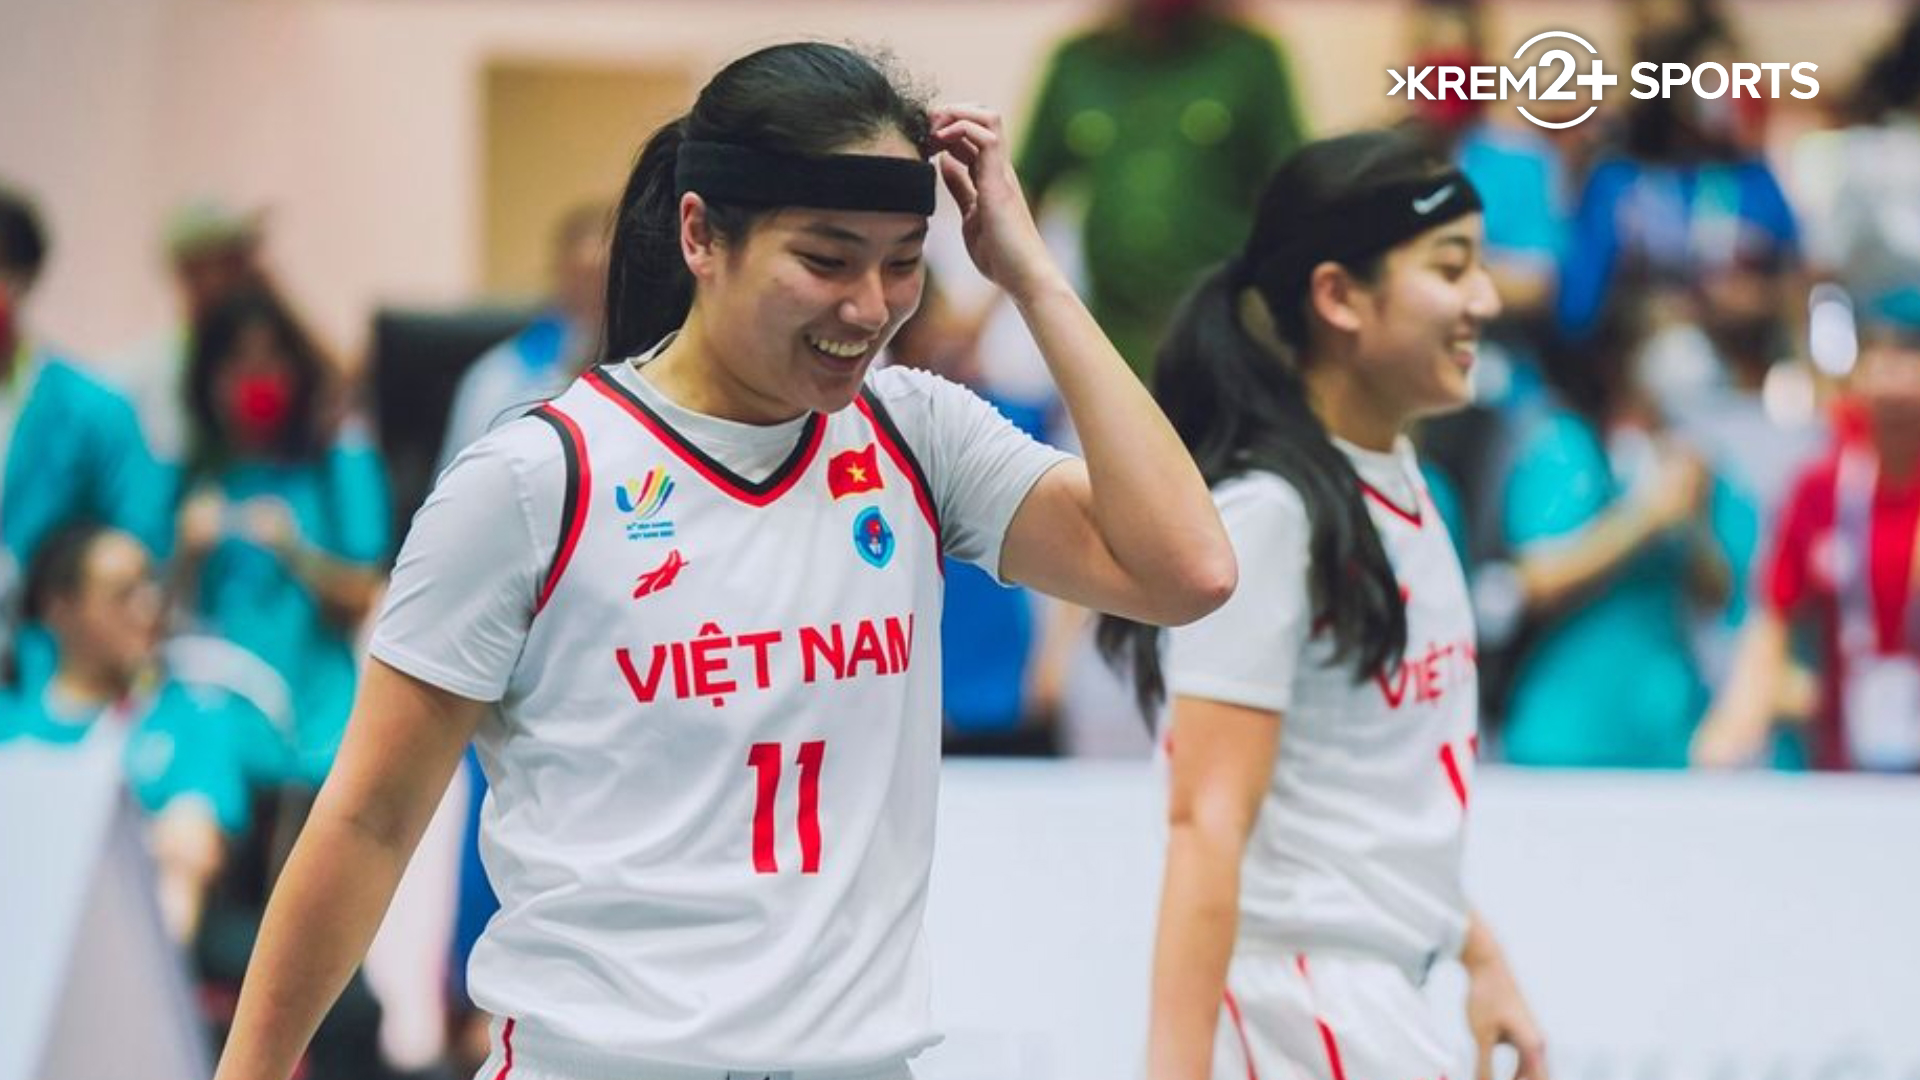 Kayleigh and Kaylynne helped Vietnam to their highest placing ever in the 3-on-3 competition, winning a silver medal.